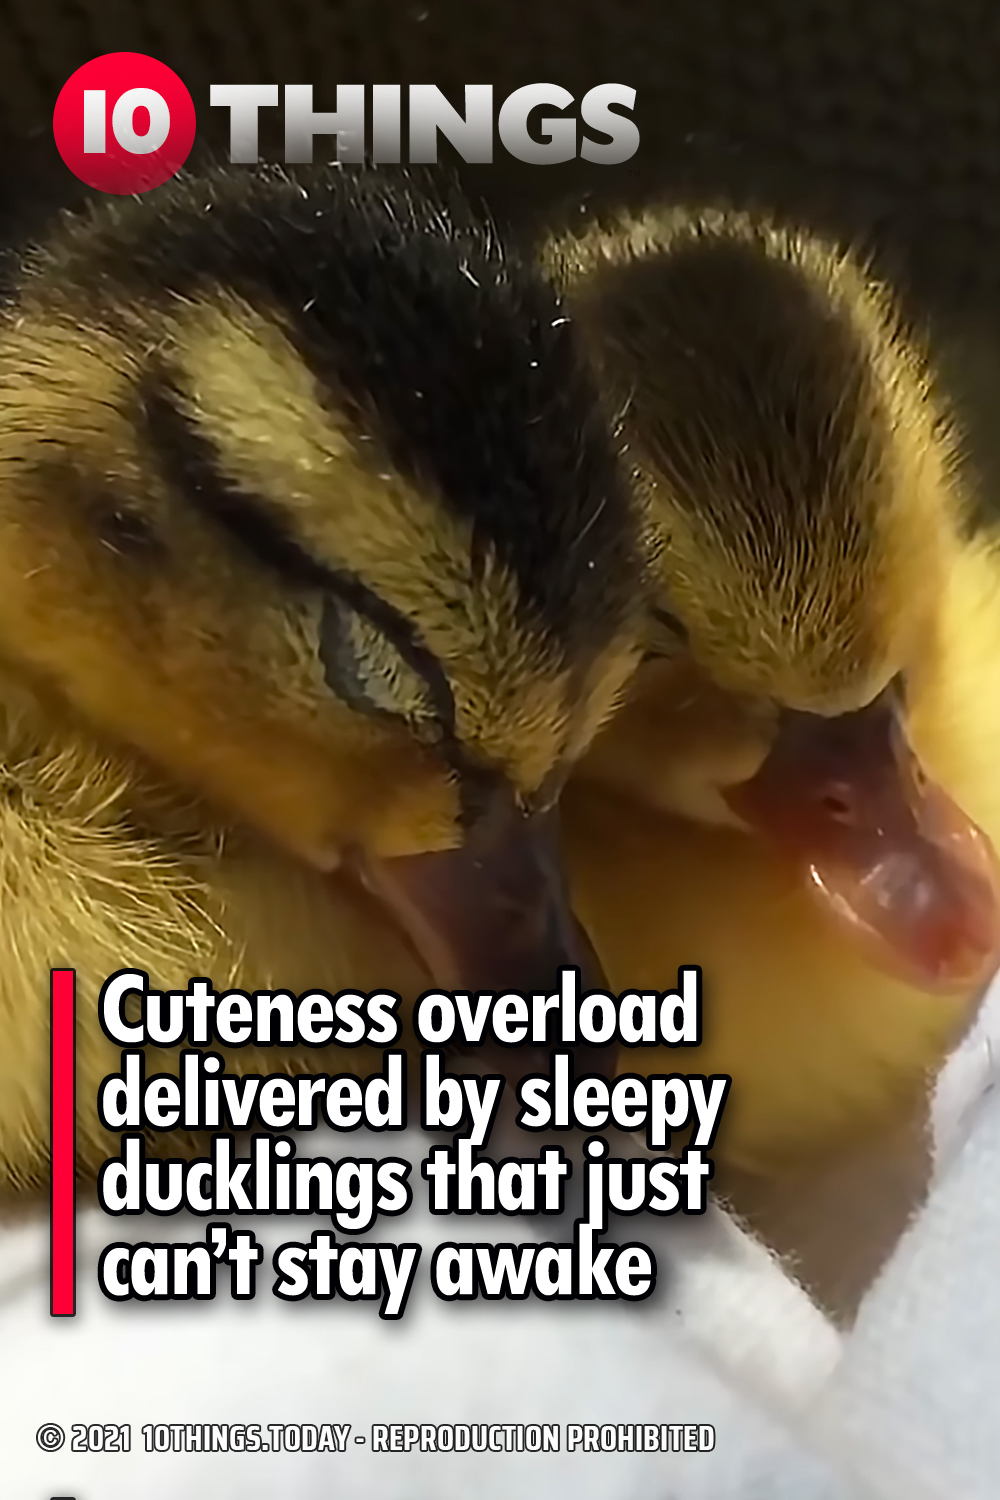 Cuteness overload delivered by sleepy ducklings that just can’t stay awake